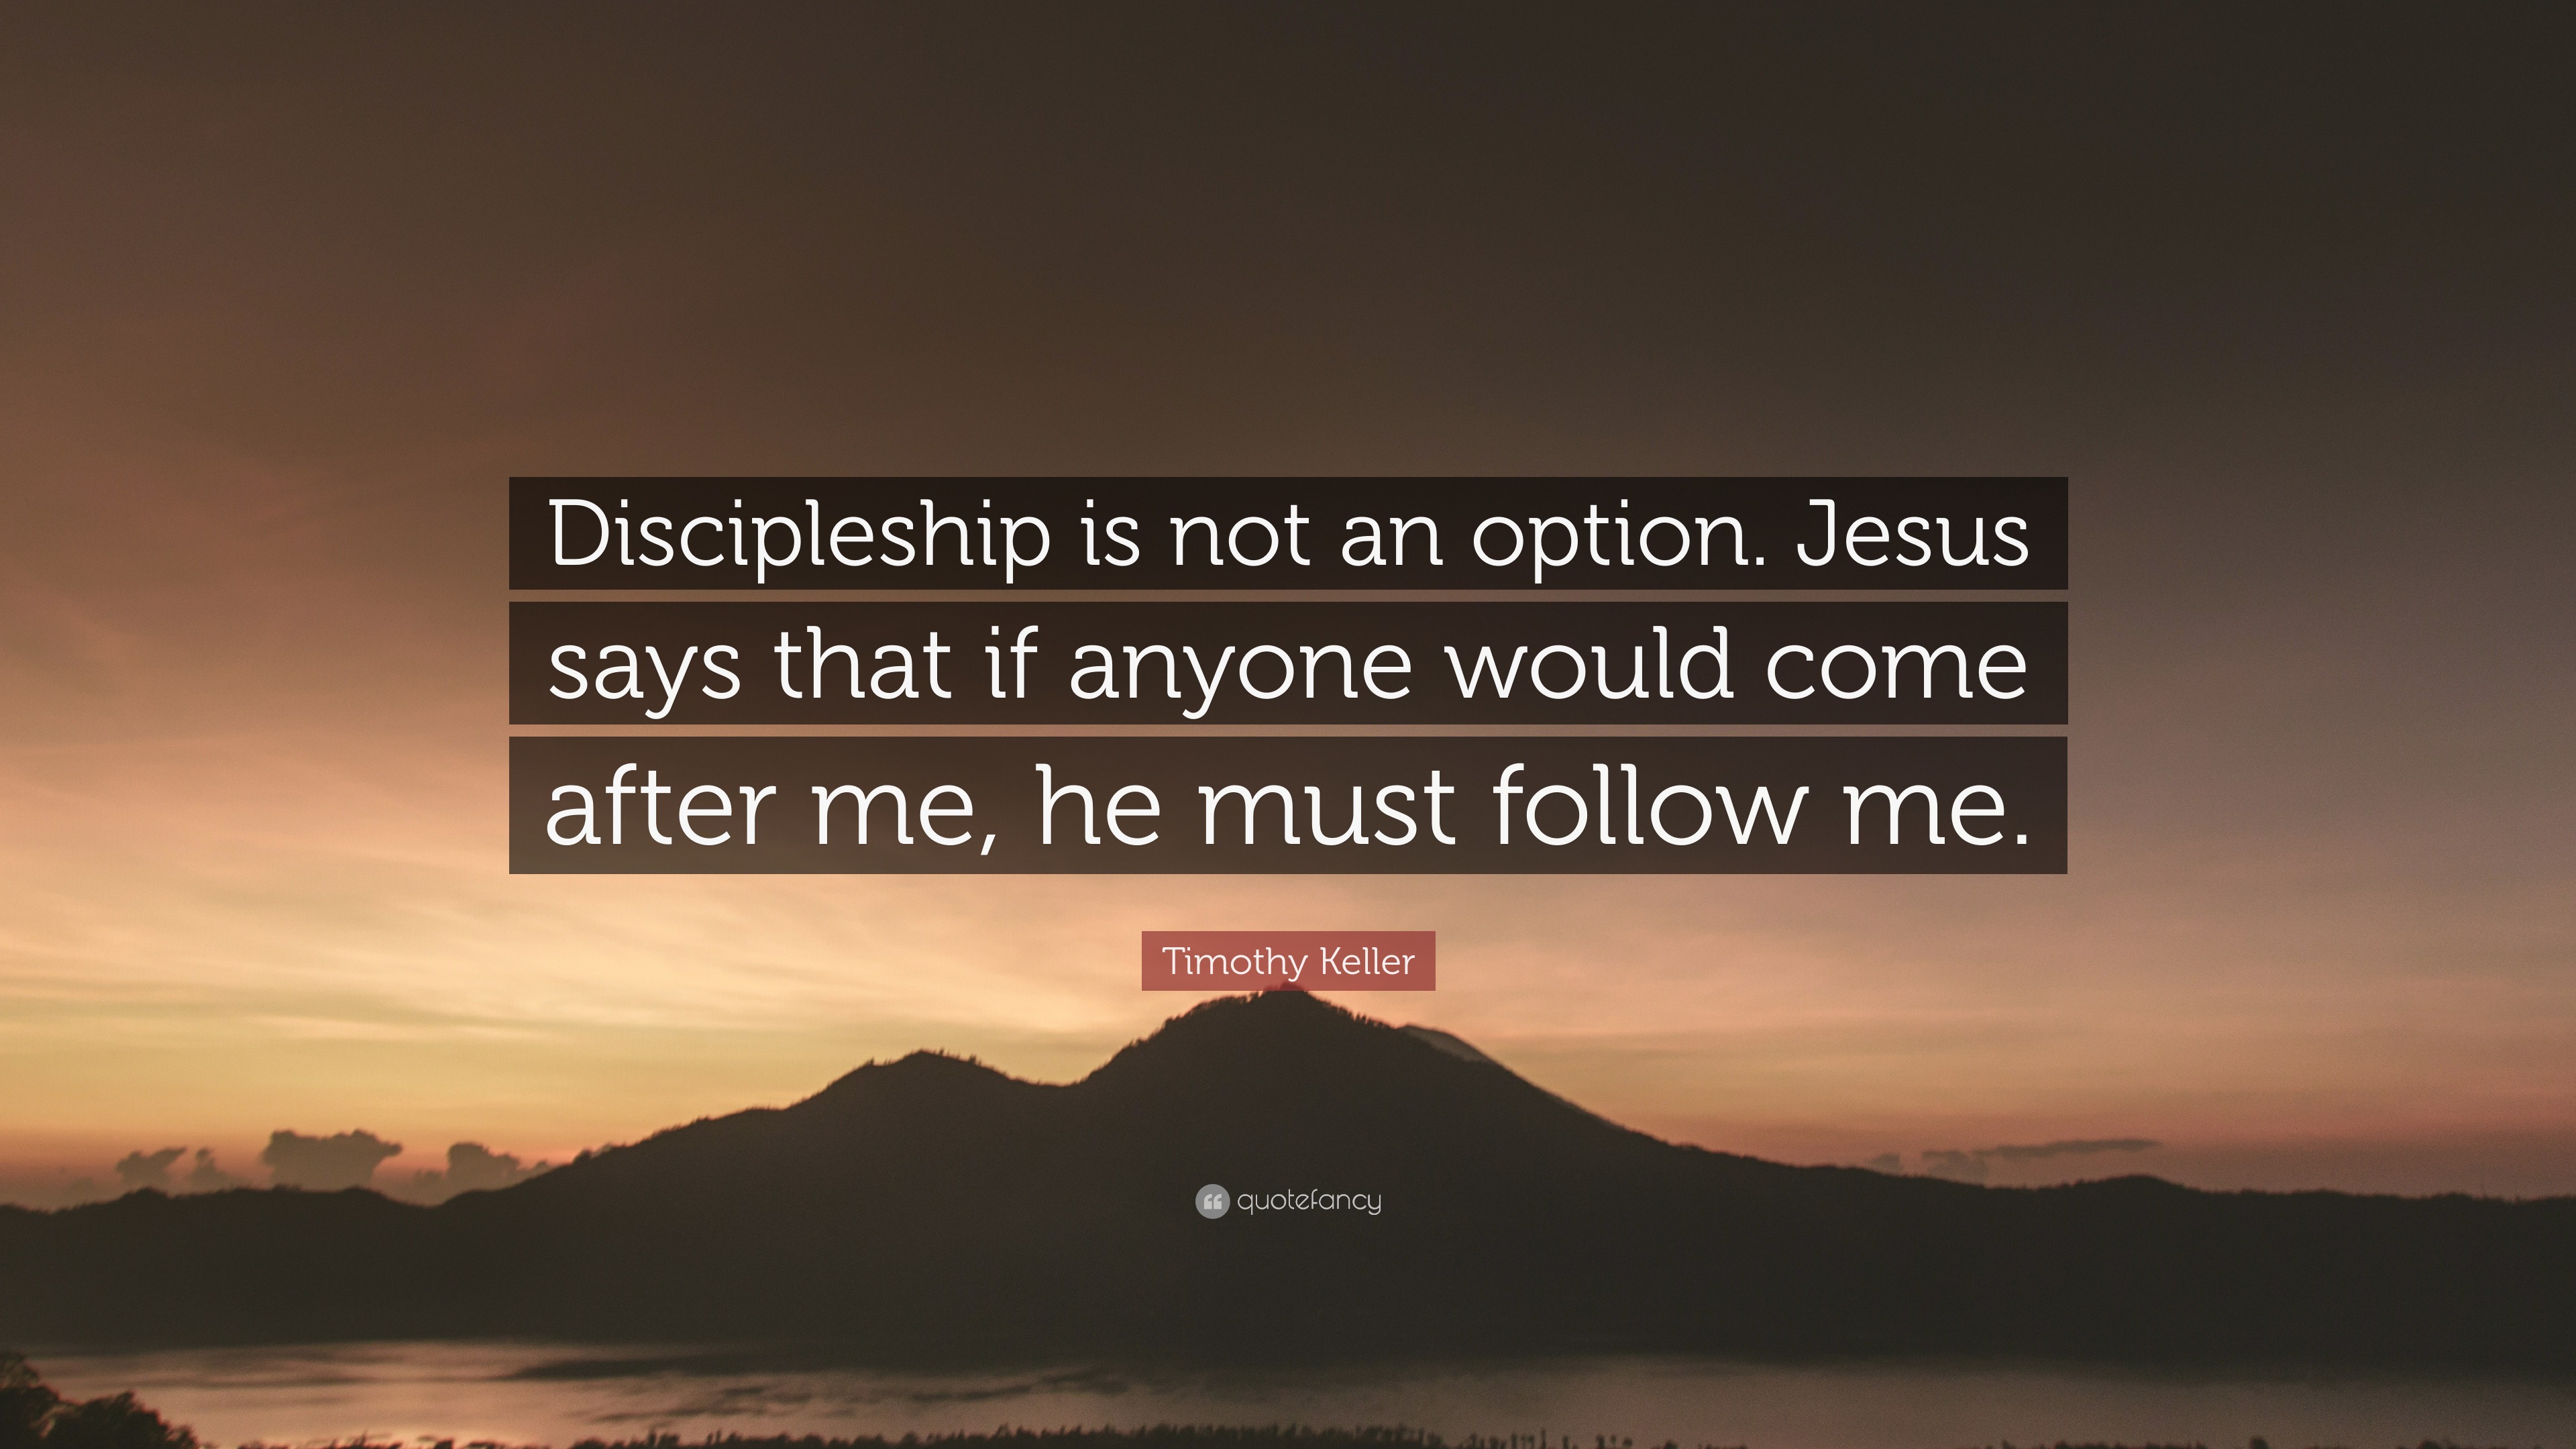 Timothy Keller Quote “Discipleship is not an option